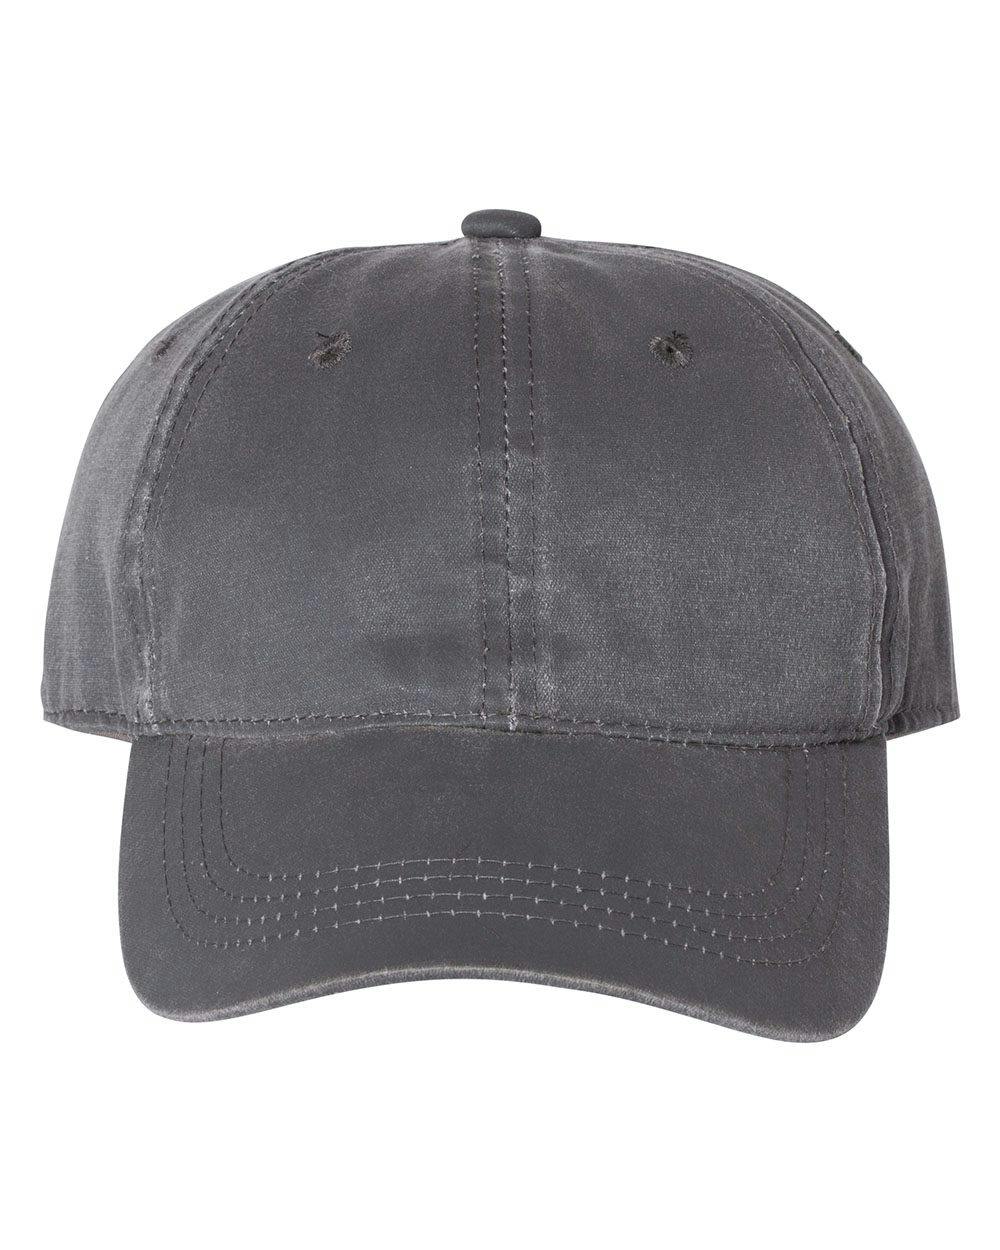 Image for Weathered Cap - HPD605